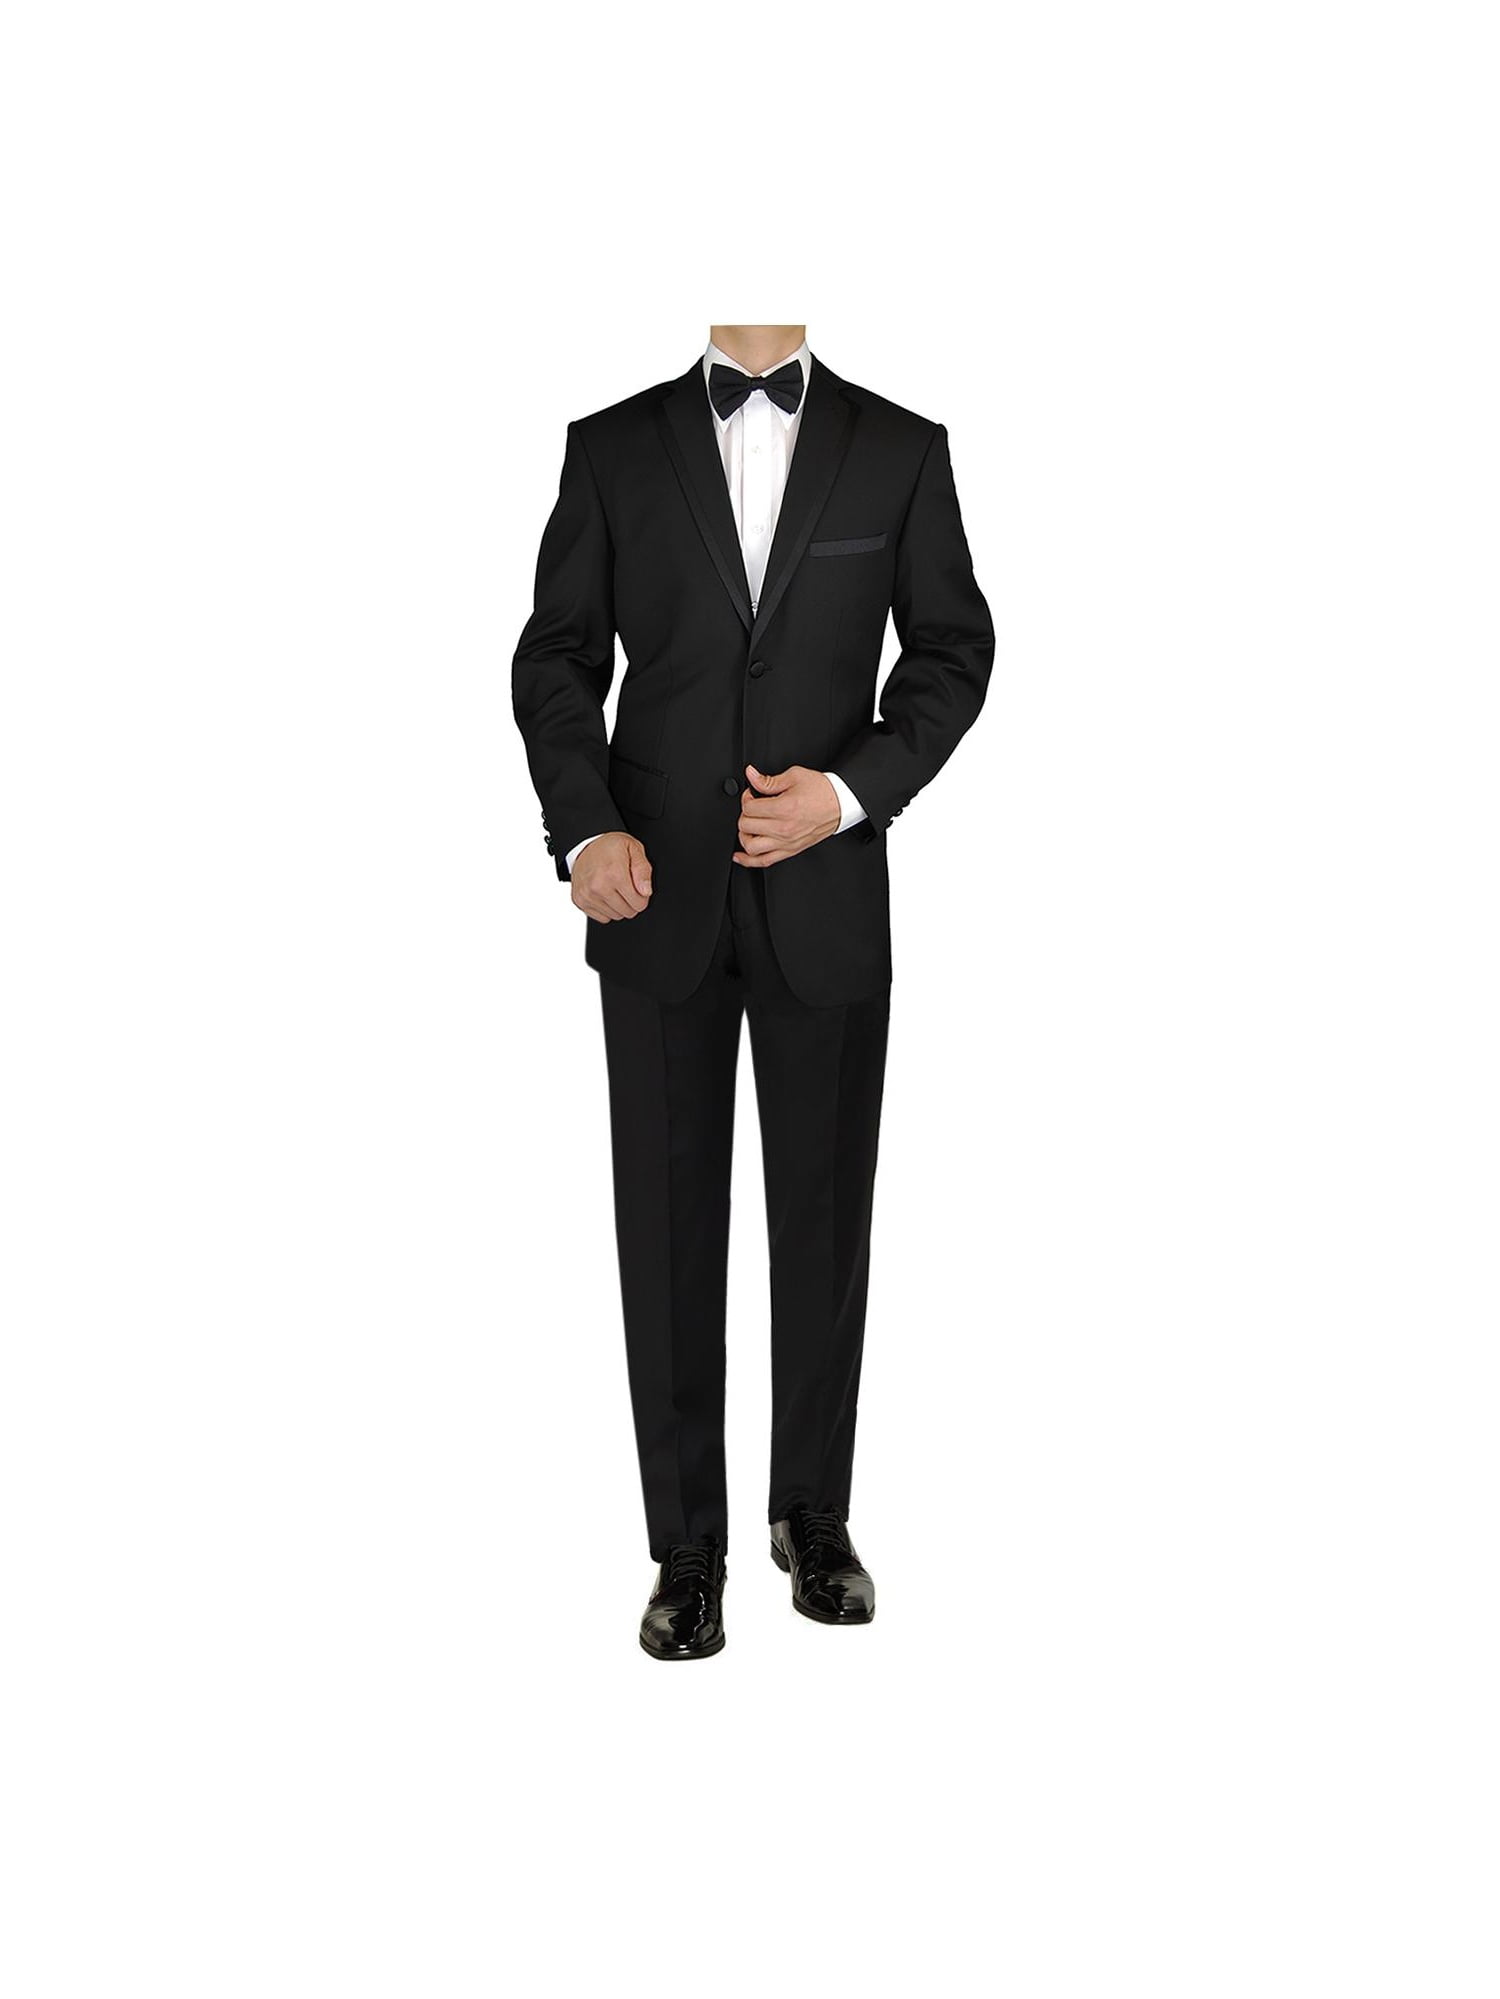 New SLIM FIT TUX Mens Black Tuxedo 2 Button Fitted Jacket With Flat Front Pants 